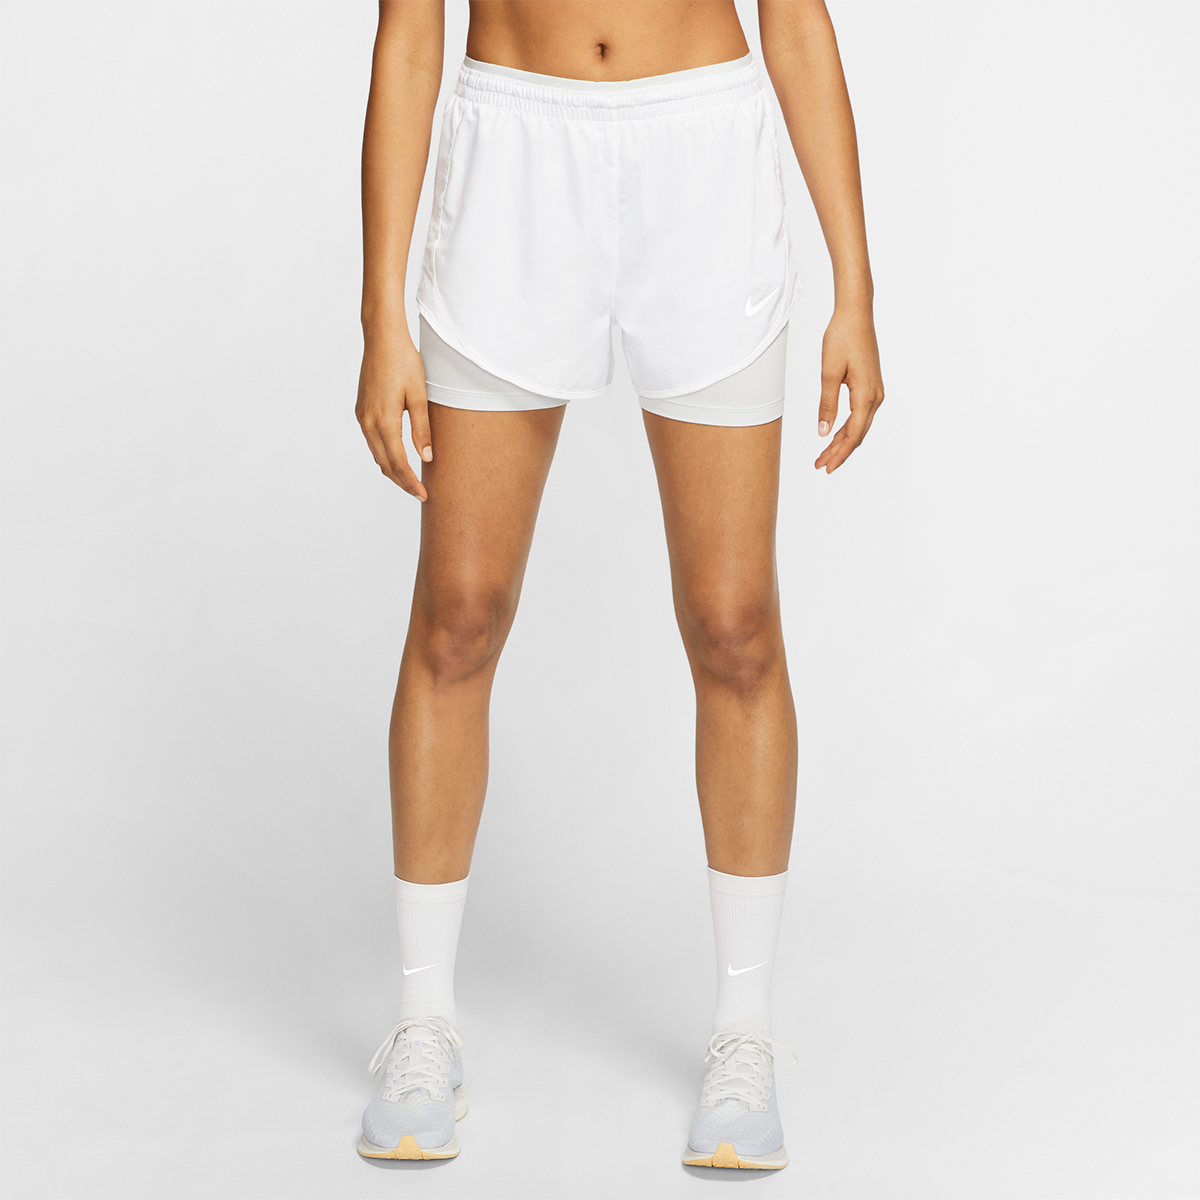 Nike Tempo Lux Short, , large image number null